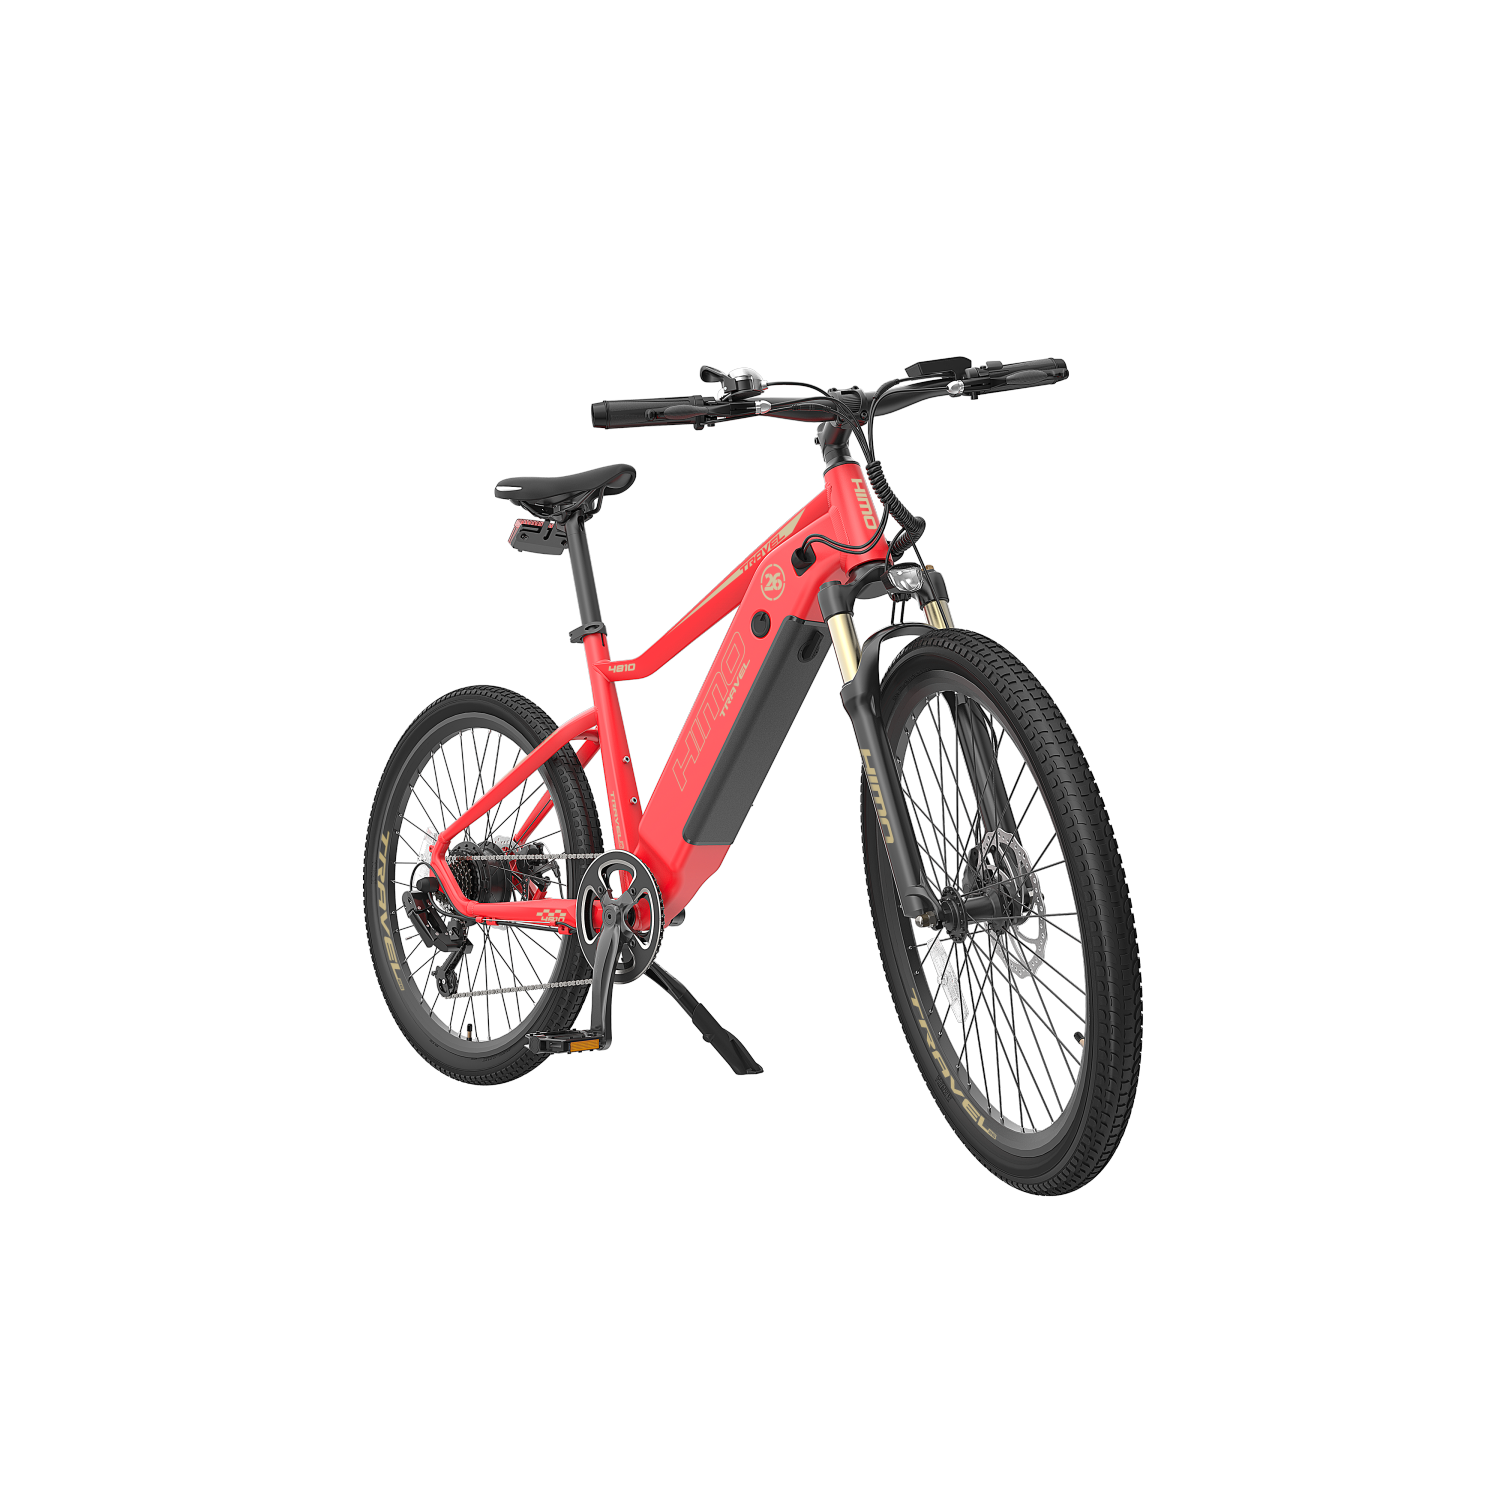 HIMO C26 Electric Bike, Red Color. Max Battery Range up to 100 KM, 48V 10Ah Removable Battery, Shimano 7-Speed, 0-7 level pedal assist, Large Multifunction LCD Display